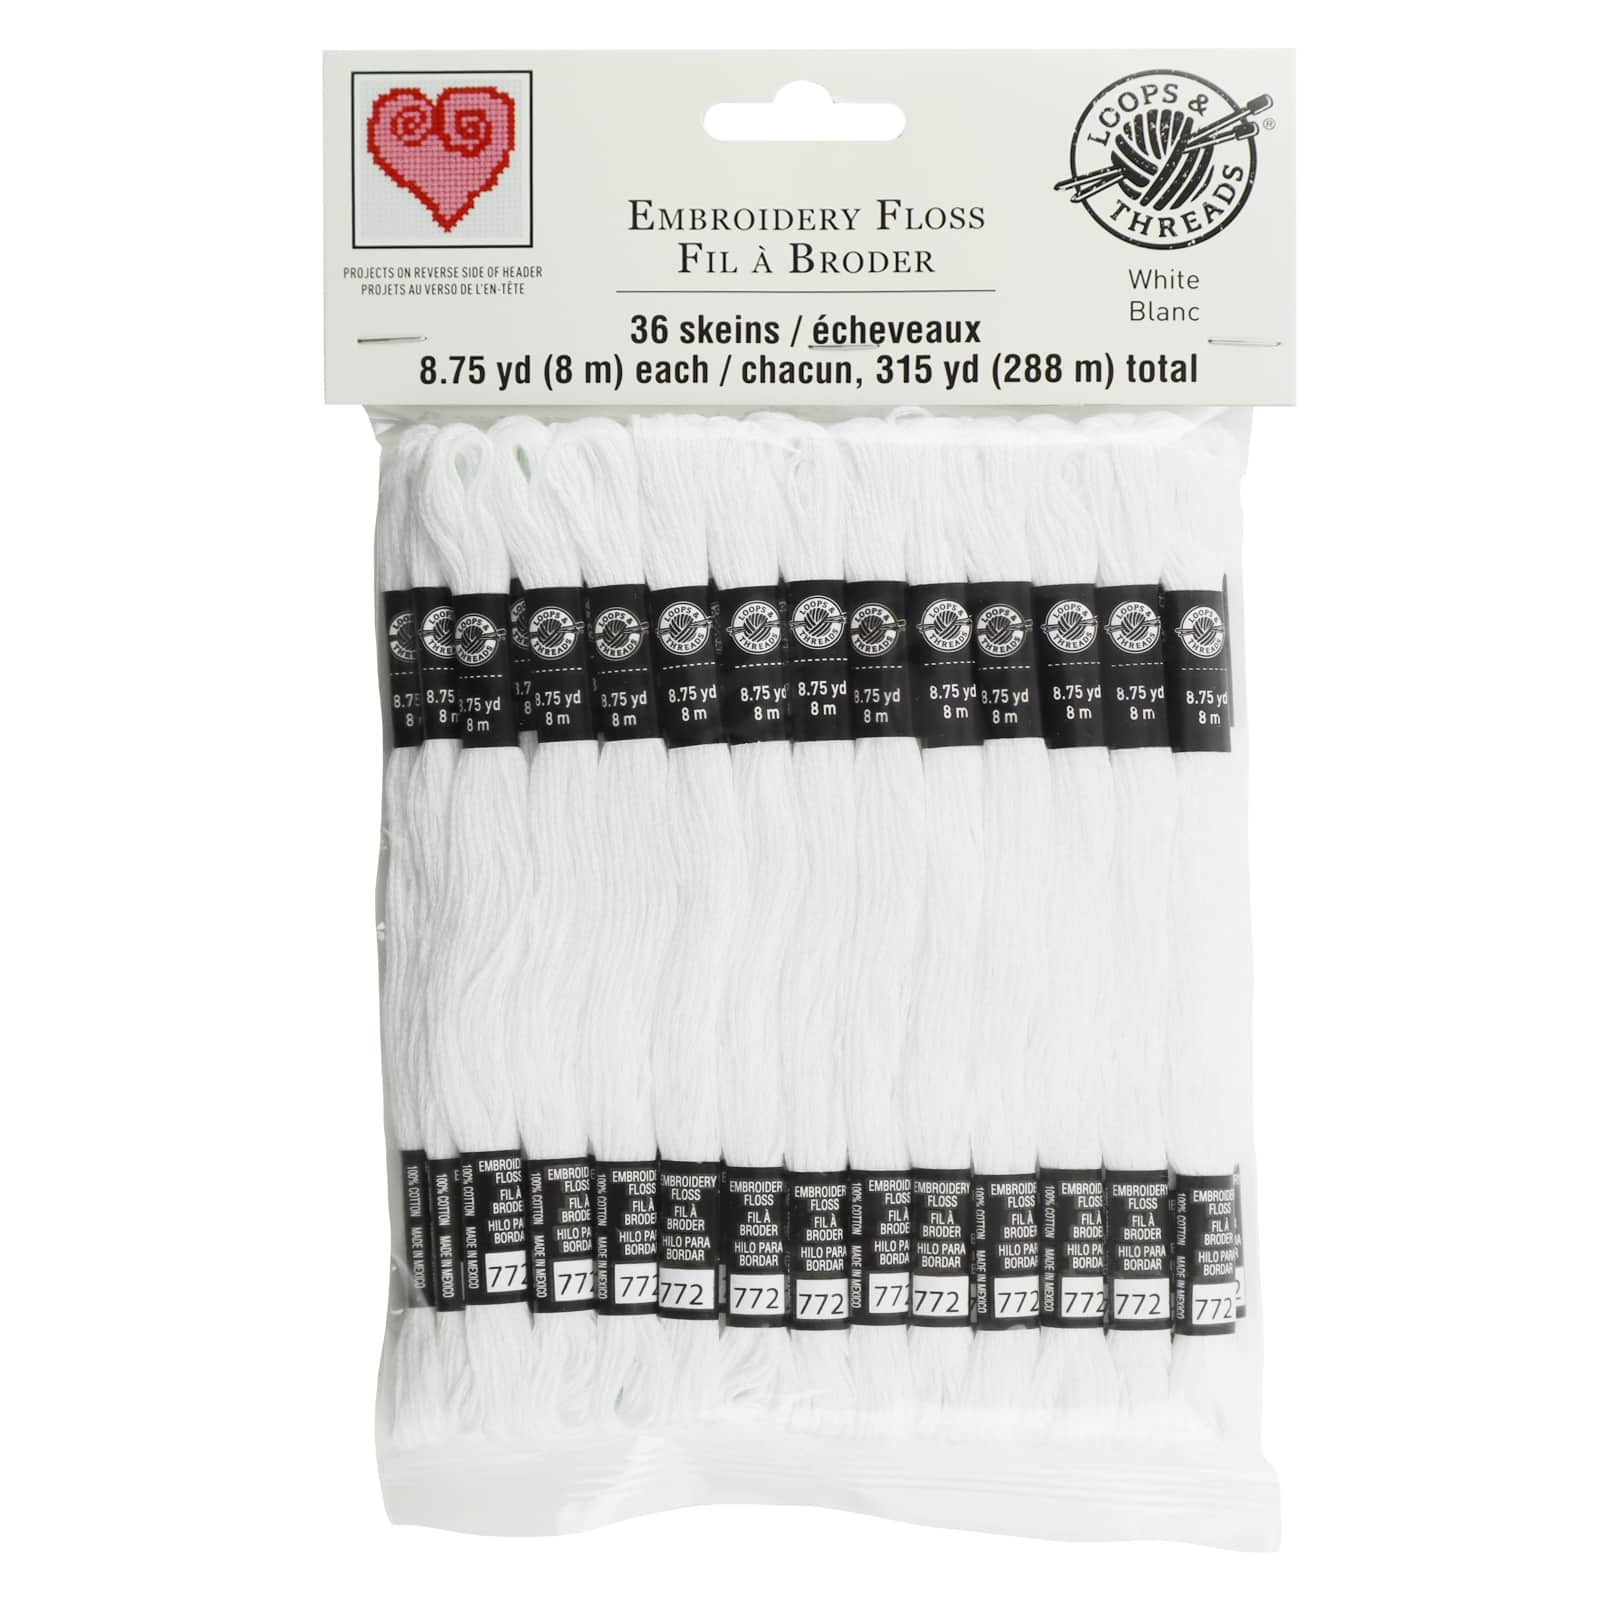 Cldamecy Embroidery Floss 13 Skeins White & 13 Skeins Black